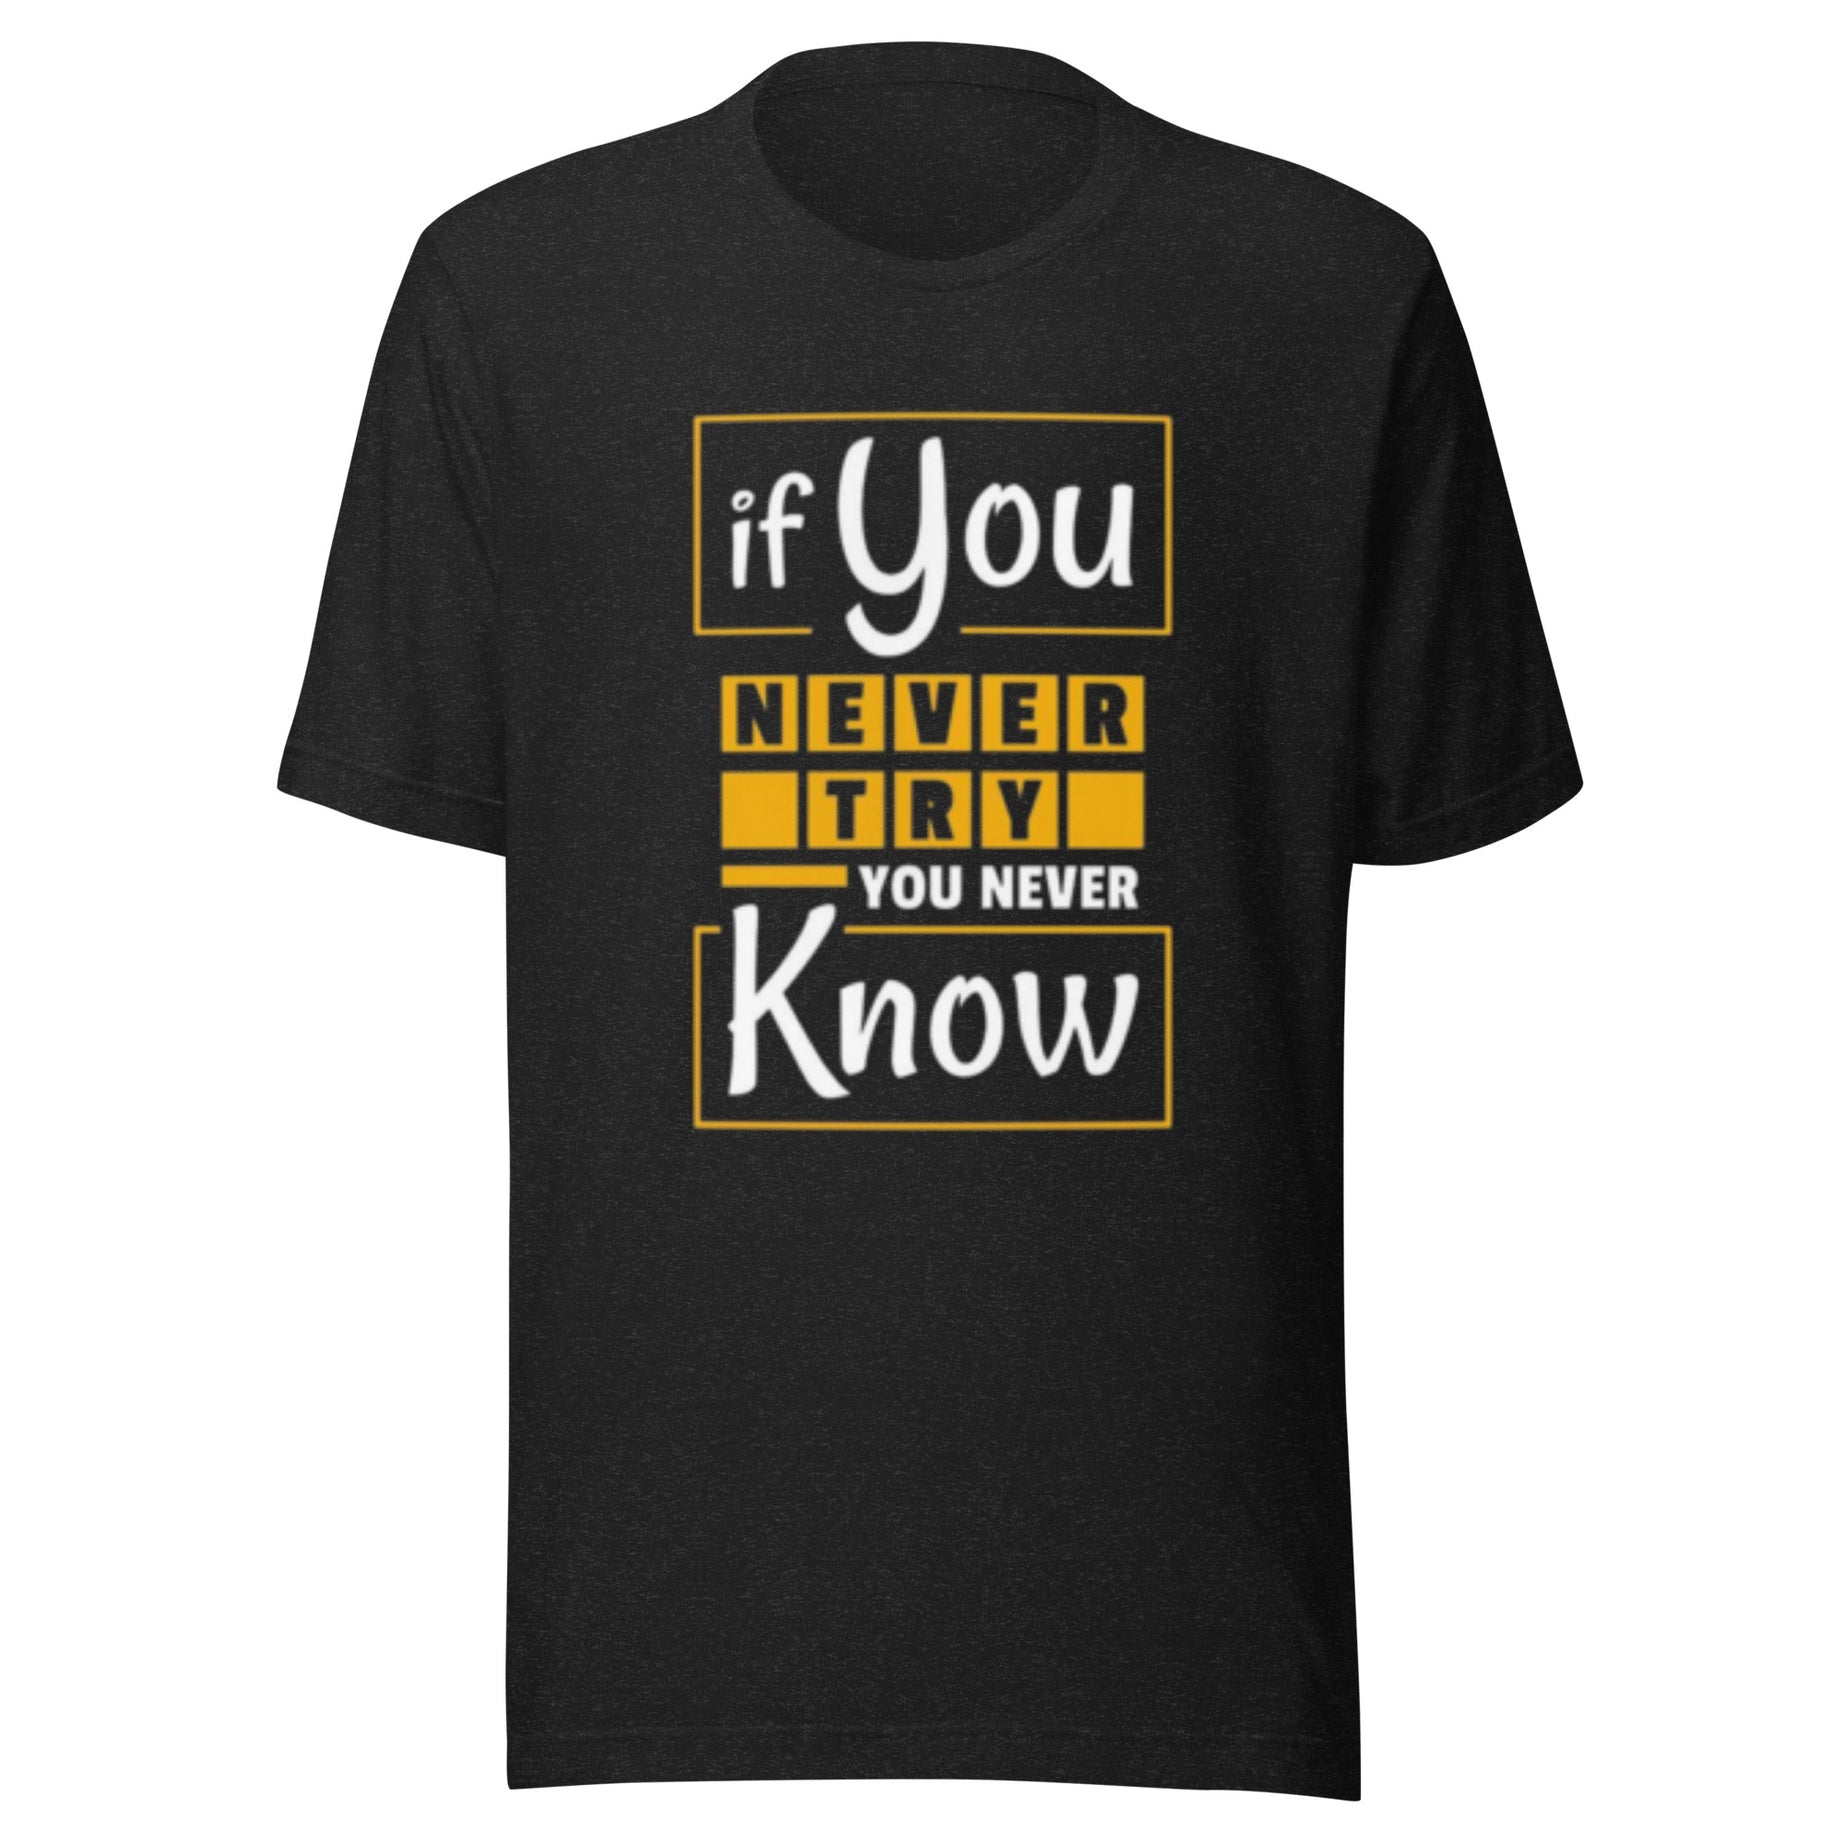 IF YOU NEVER TRY YOU NEVER KNOW T-SHIRT